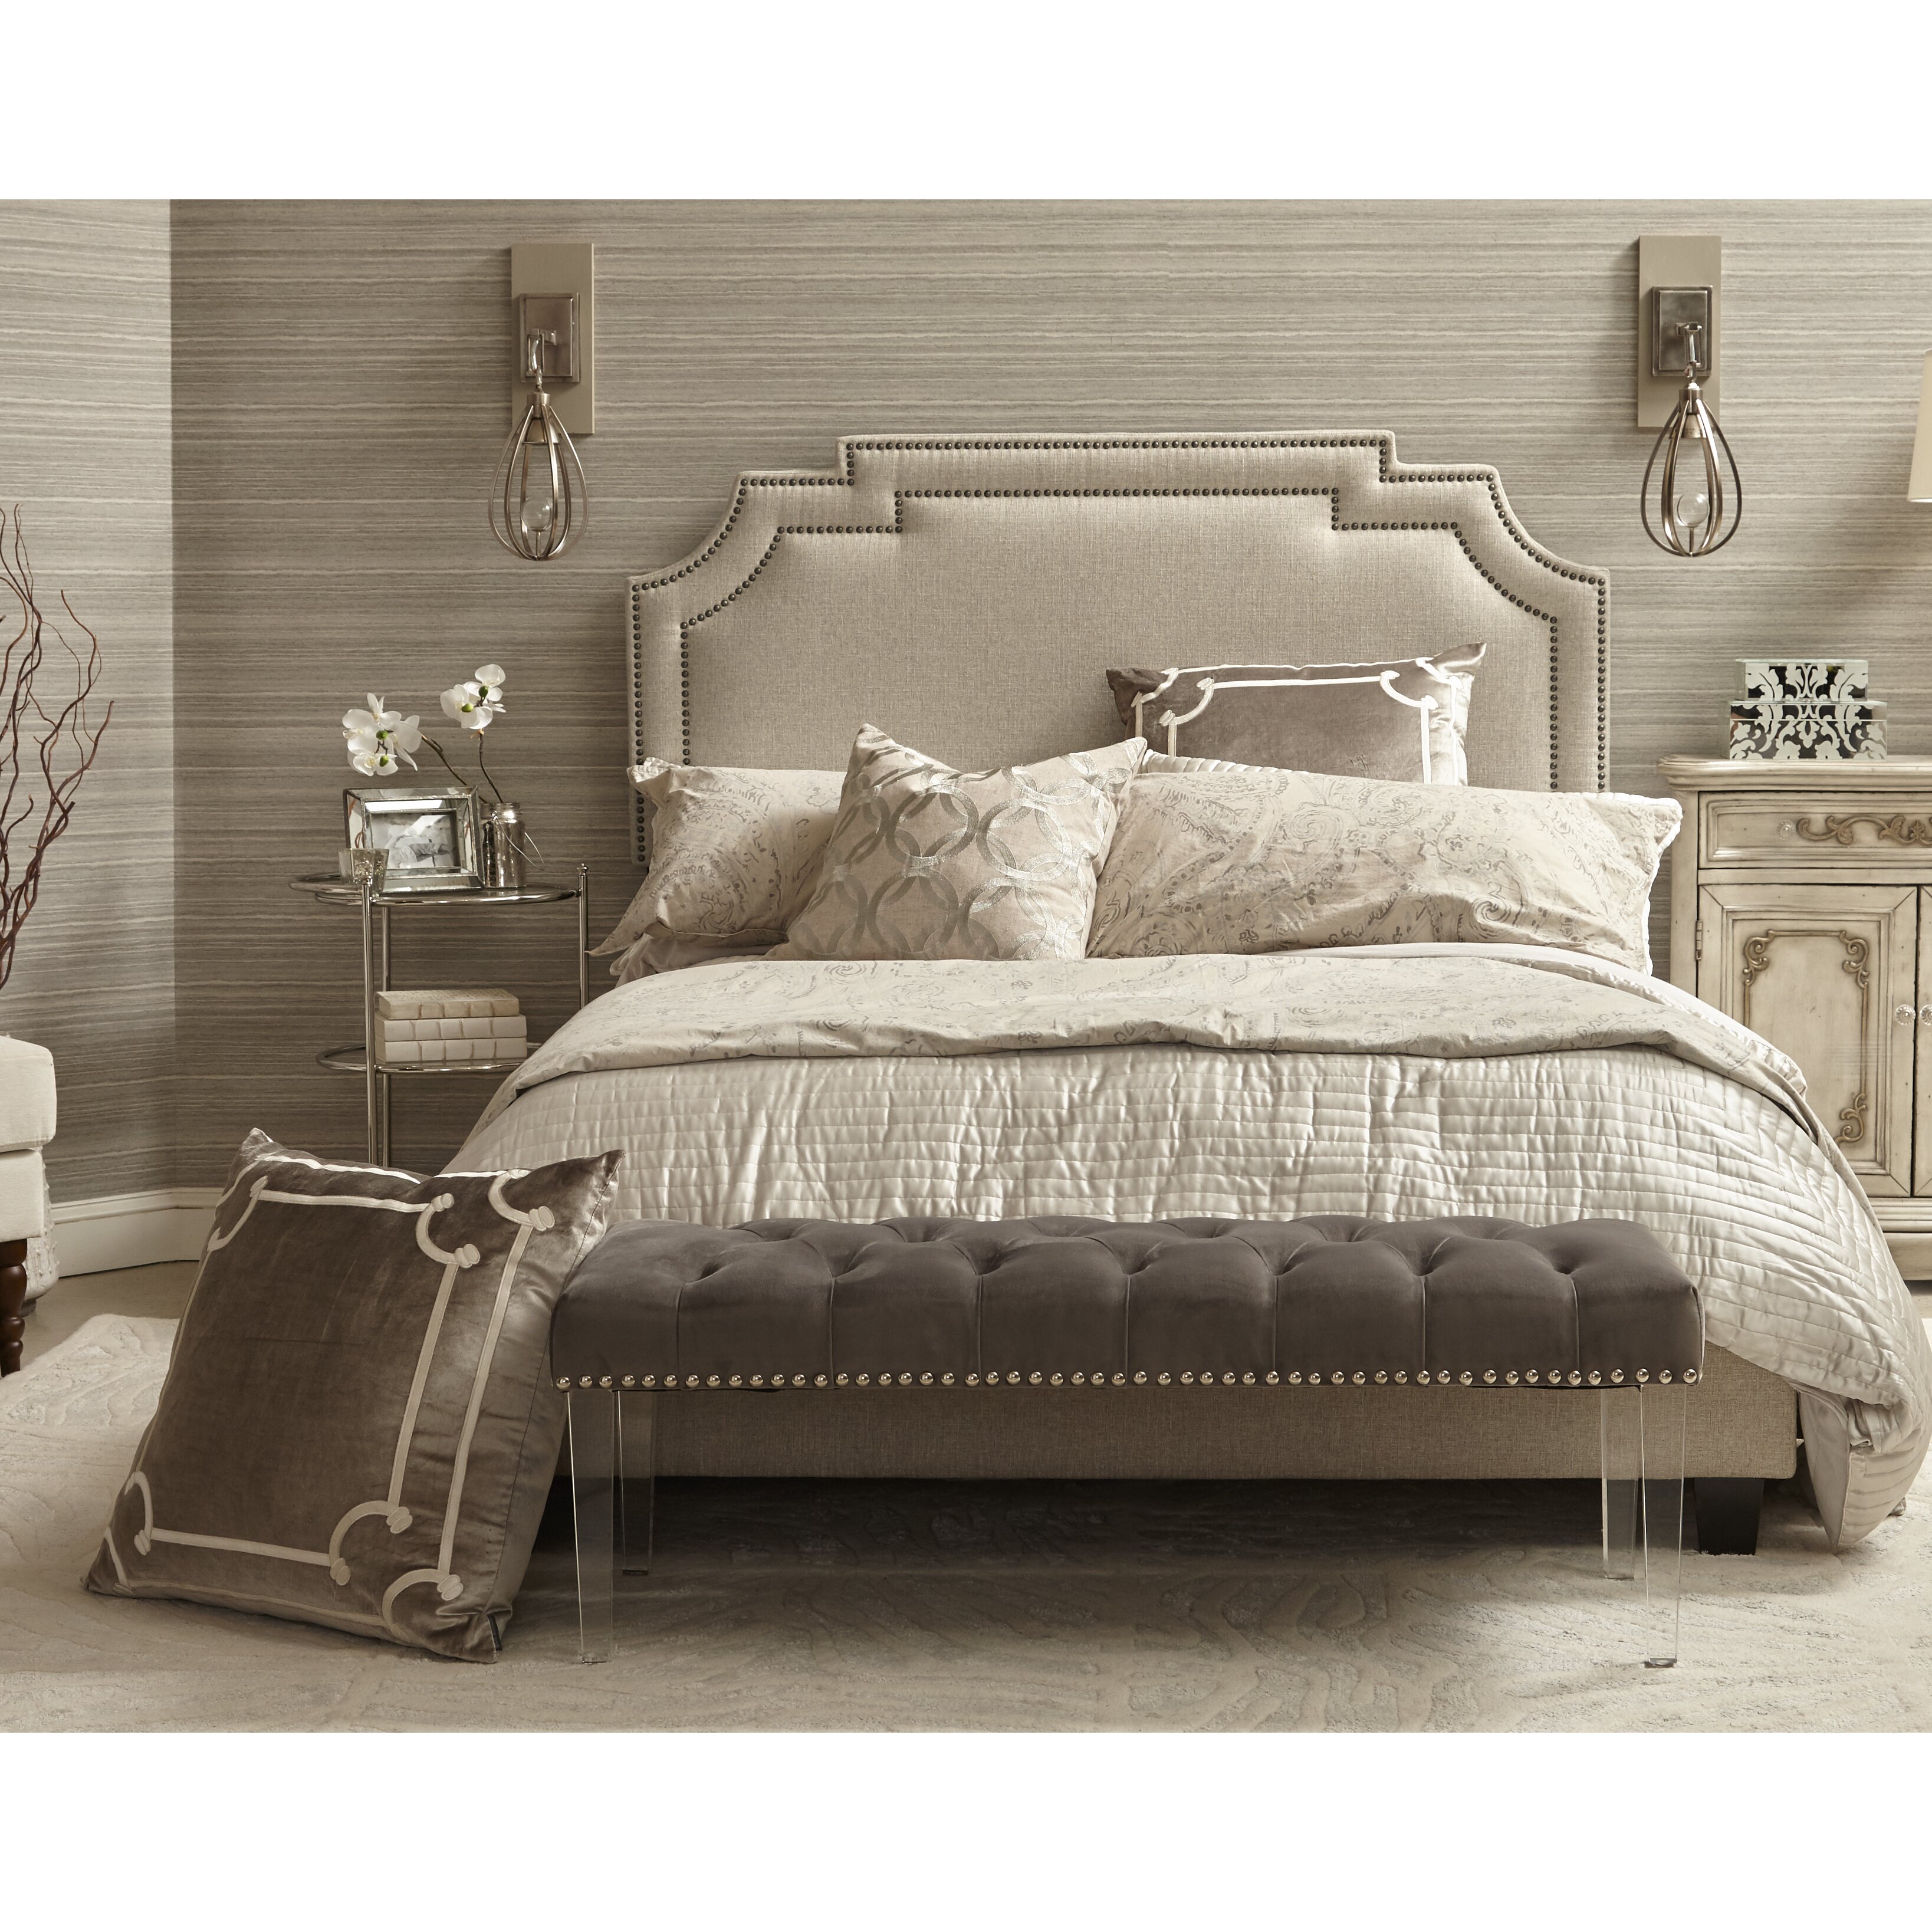 Darby Home Co Galway Tiered Clipped Corner Queen Upholstered Panel Bed